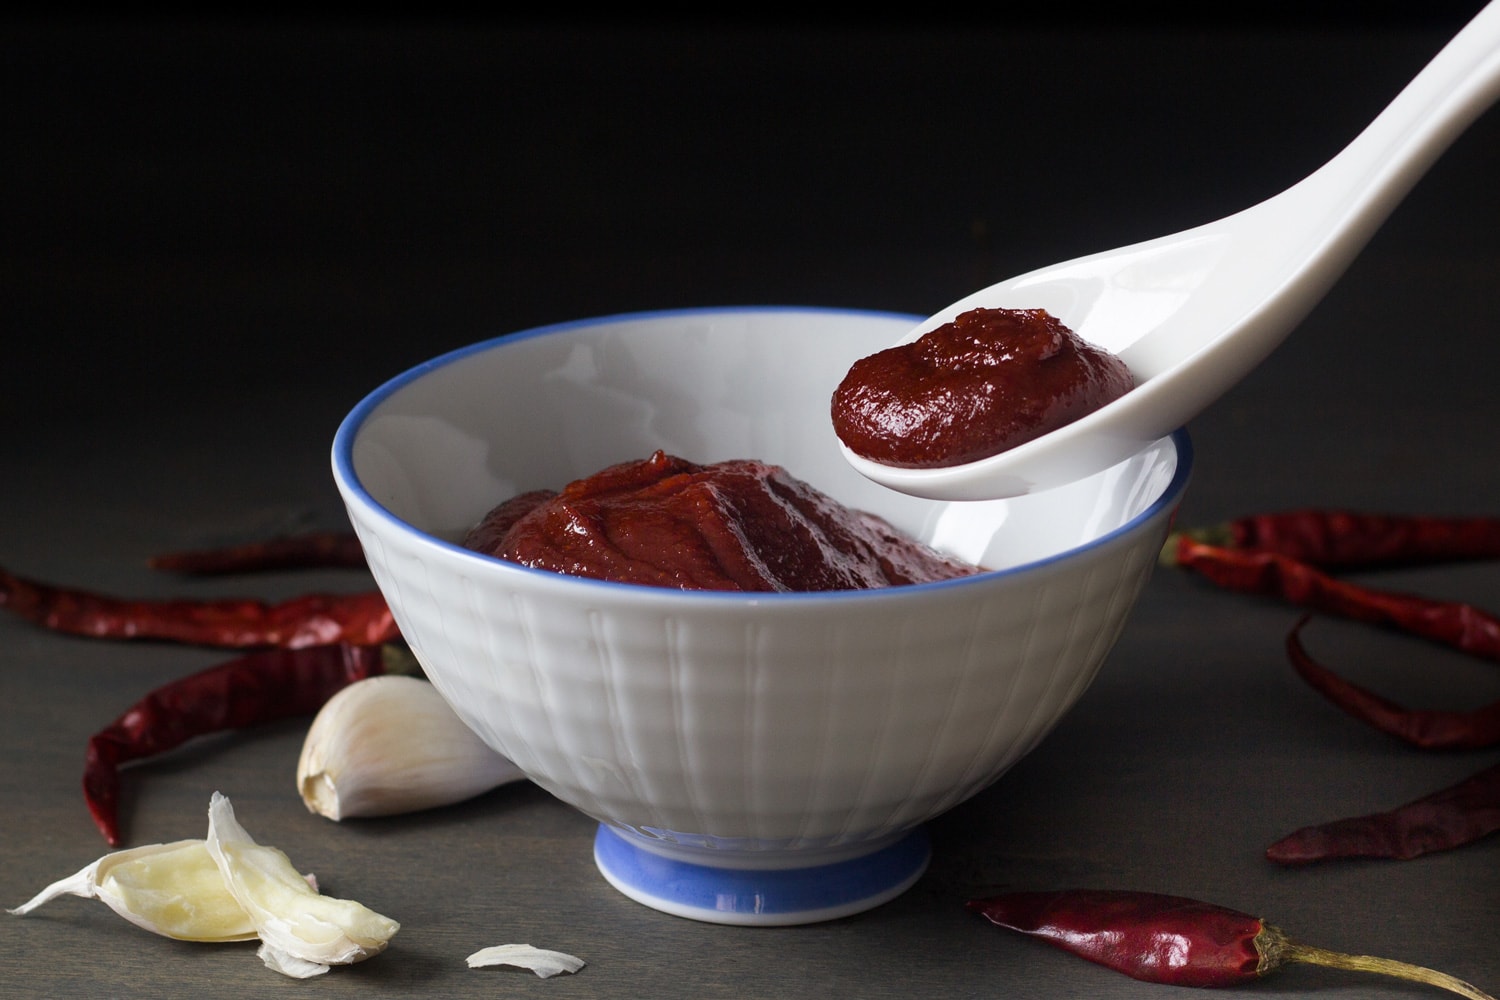 Gochujang in white bowl with spoon, with garlic and chilis on dark background